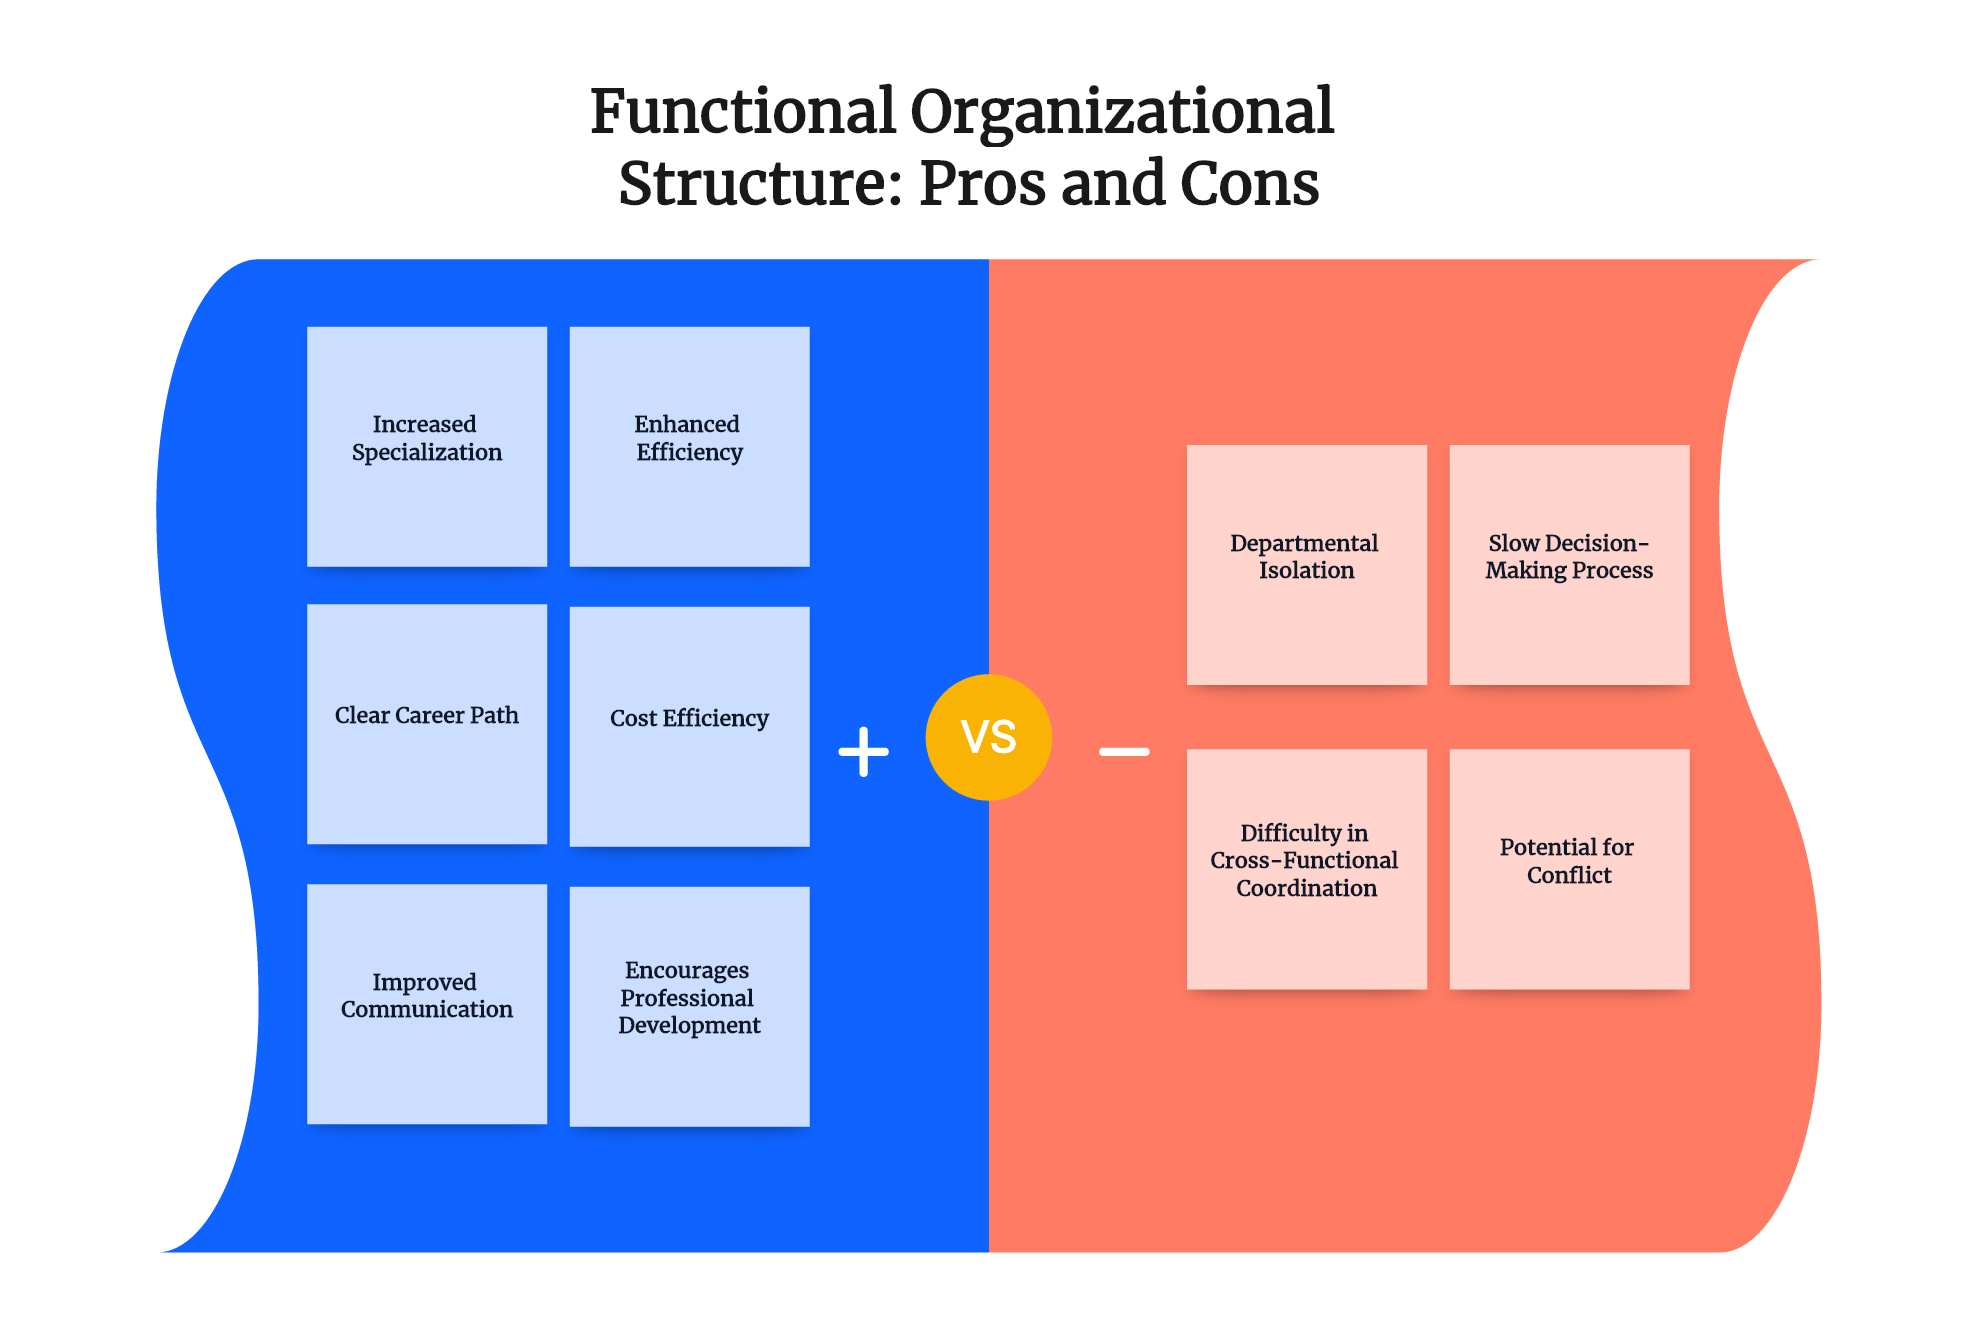 Functional Organizational Structure: Pros and Cons